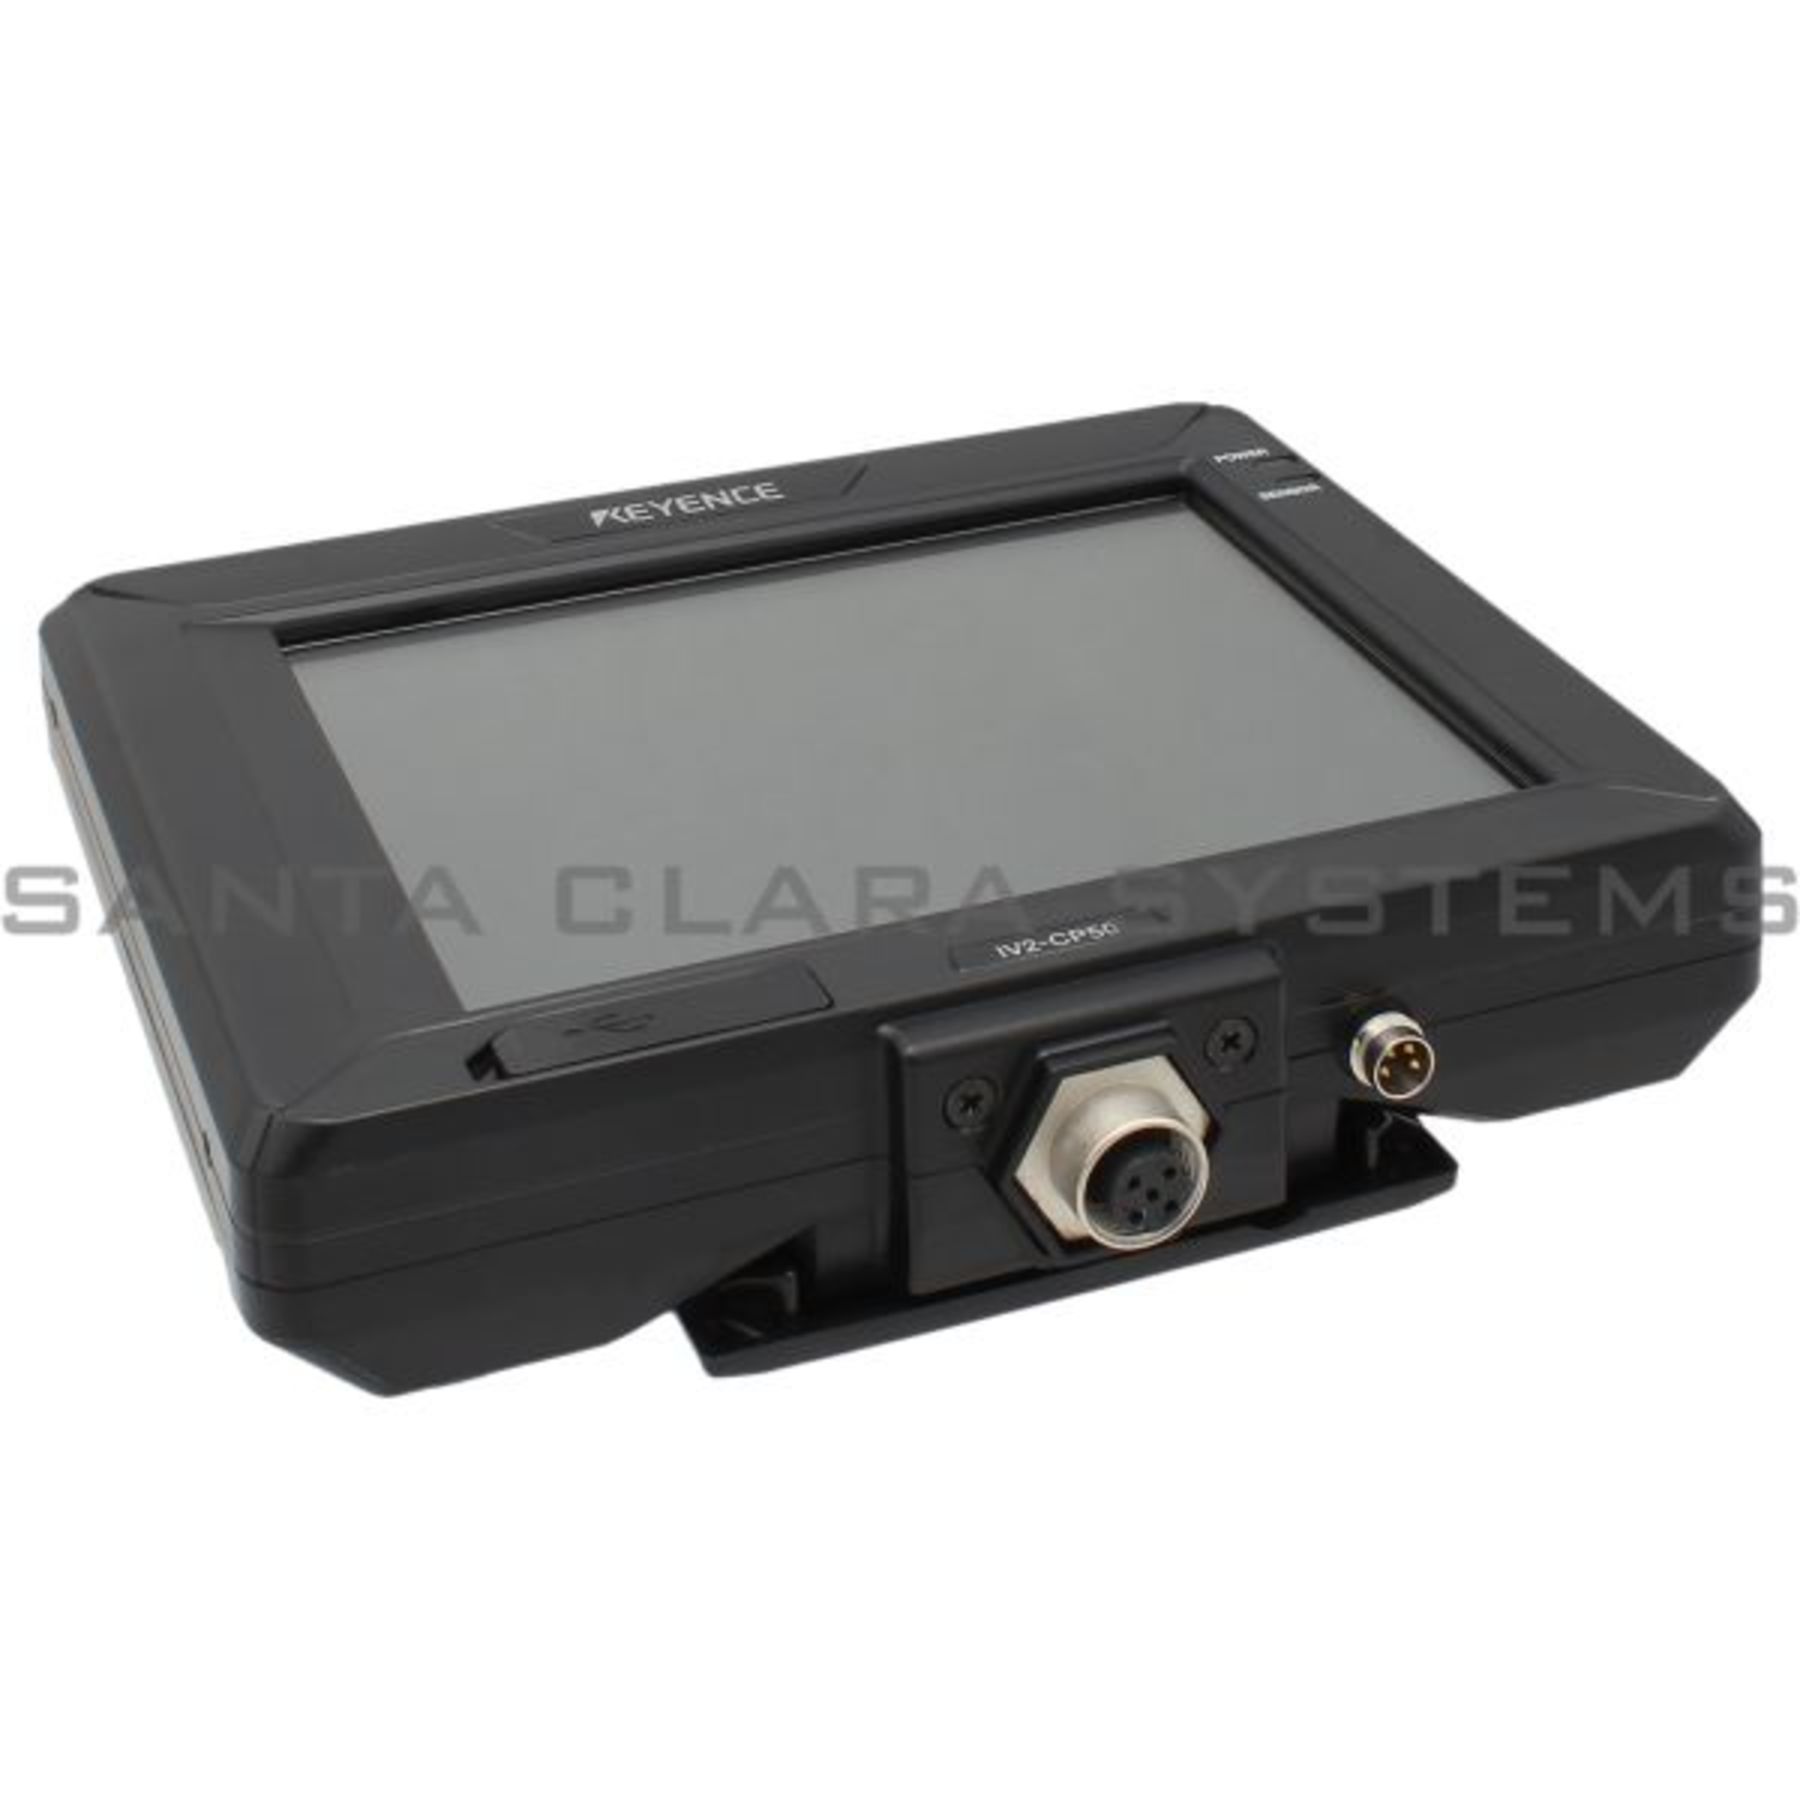 Keyence Color LCD Display Control Panel IV2-CP50 In-Stock. Ships